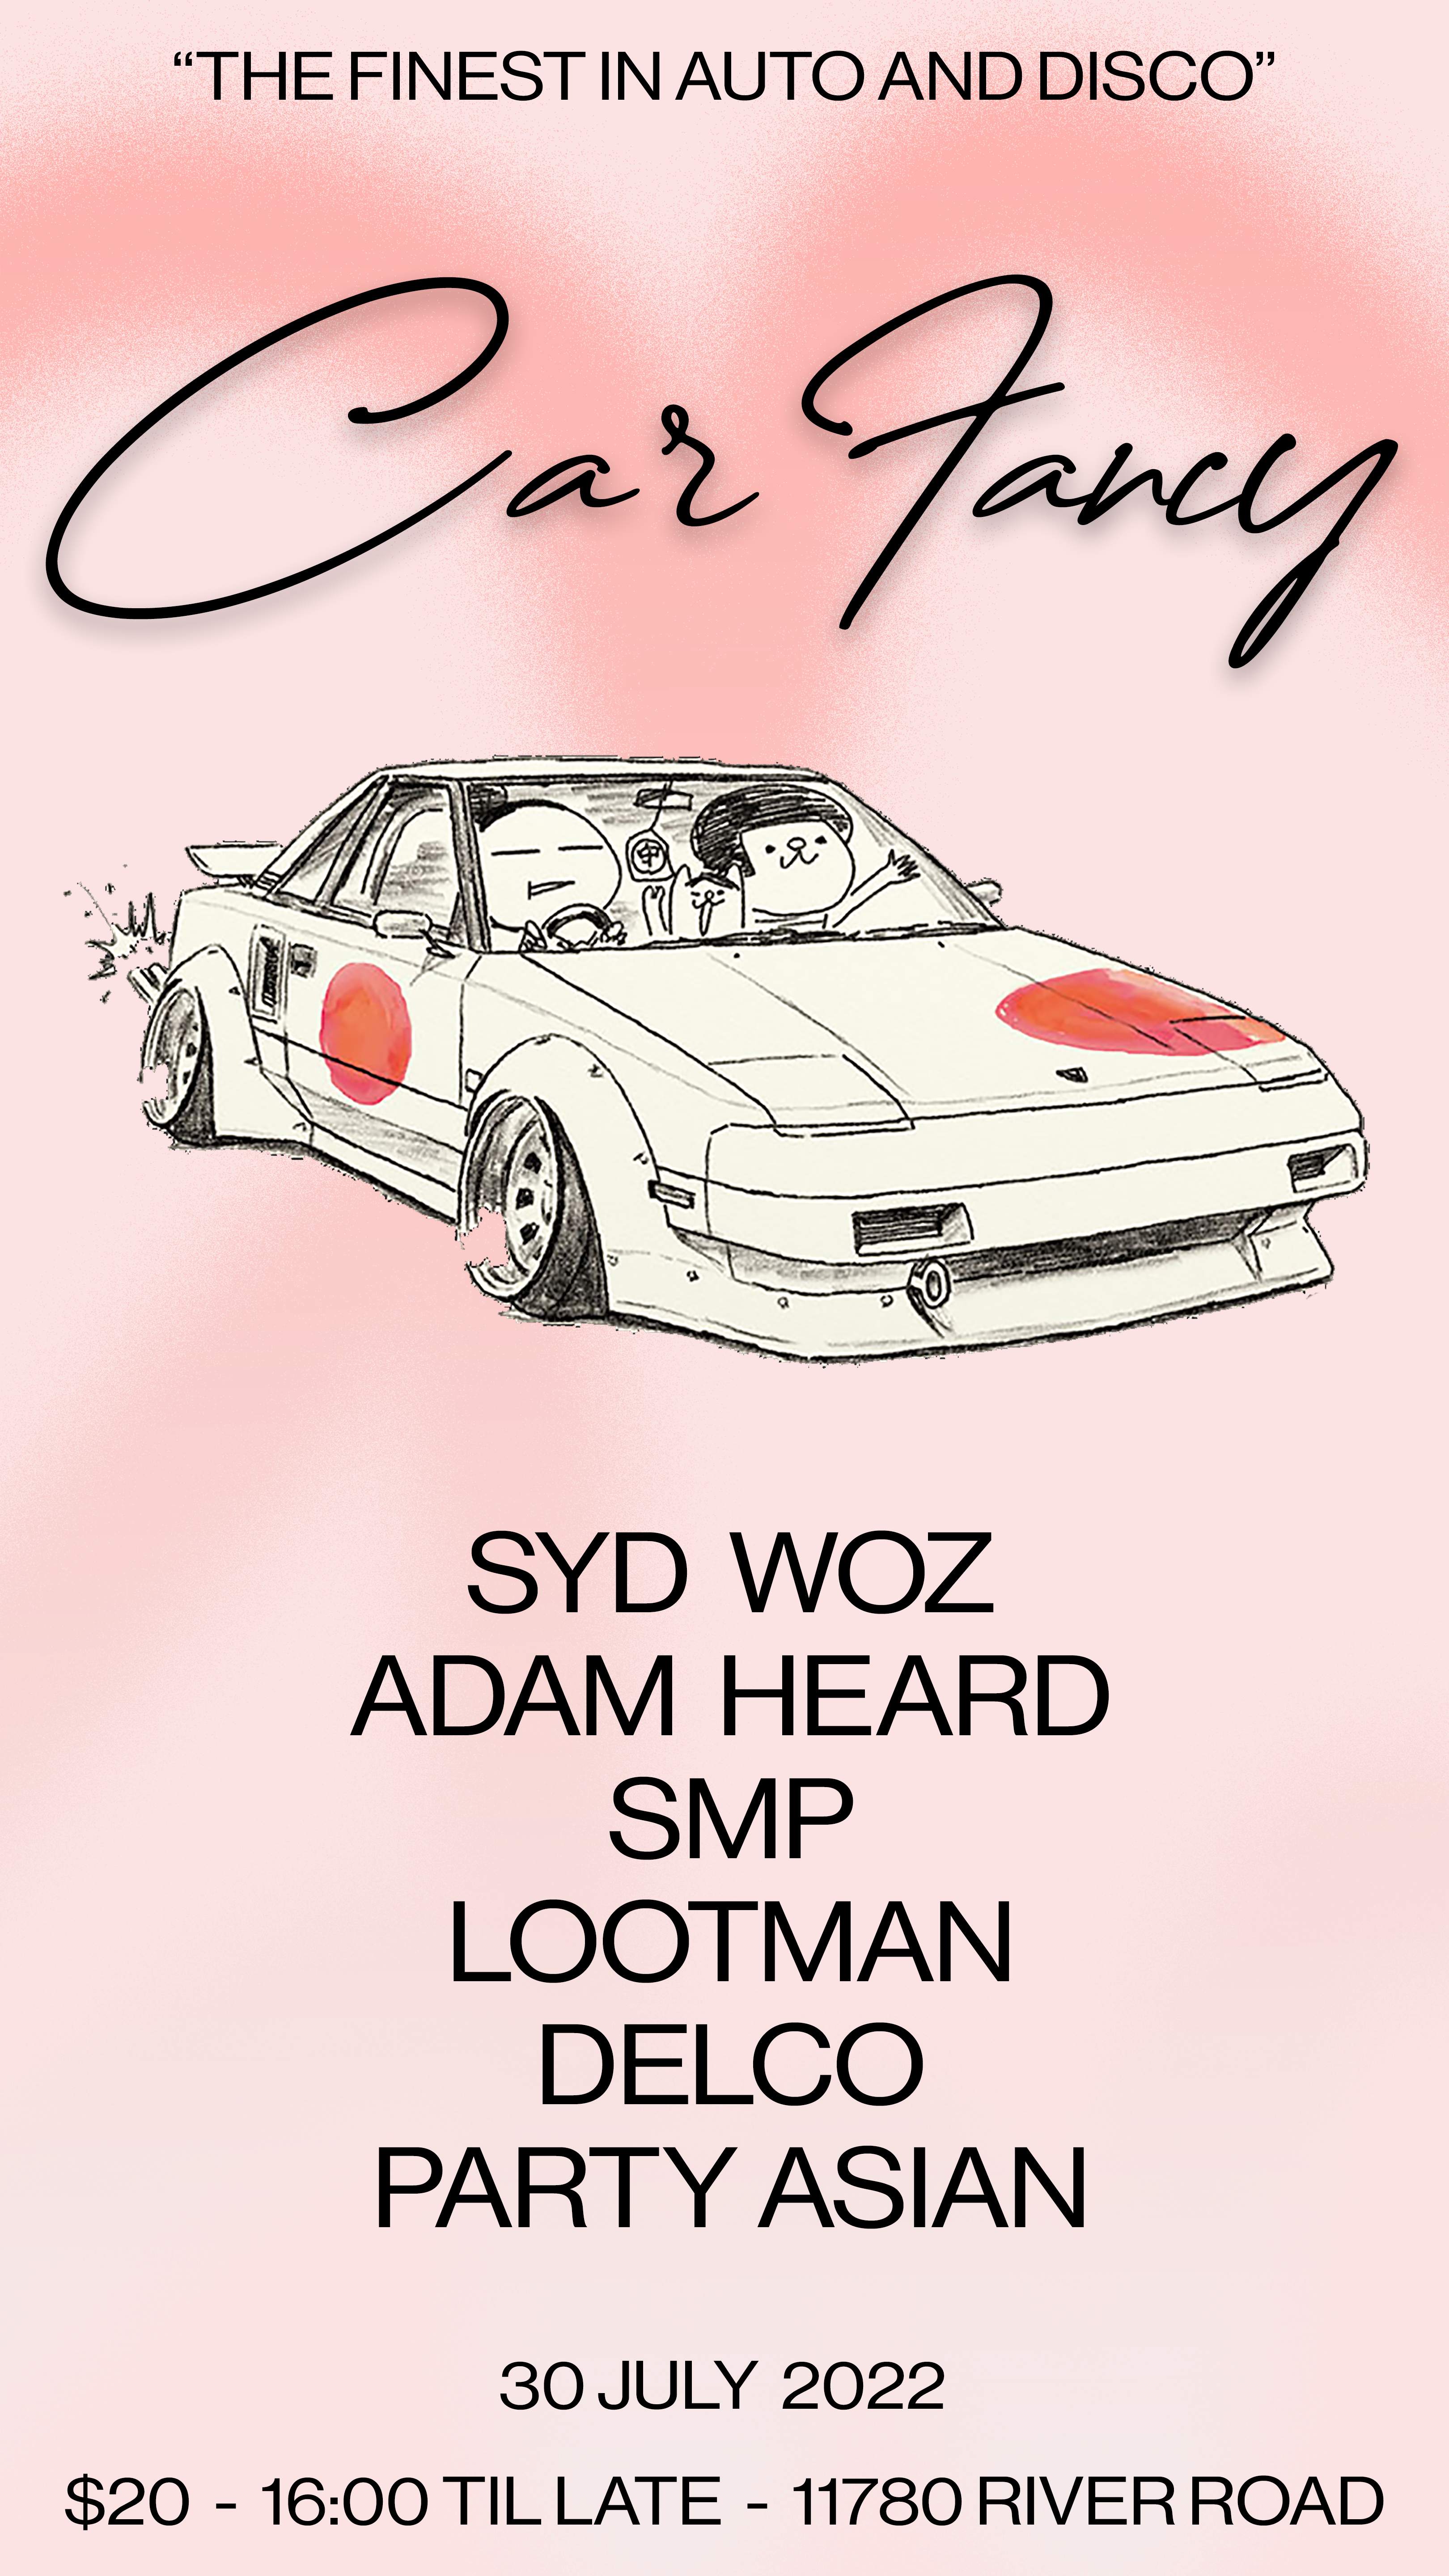 Car Fancy with SMP, Syd Woz, Adam Heard, Lootman, Delco, and Party Asian - Página frontal